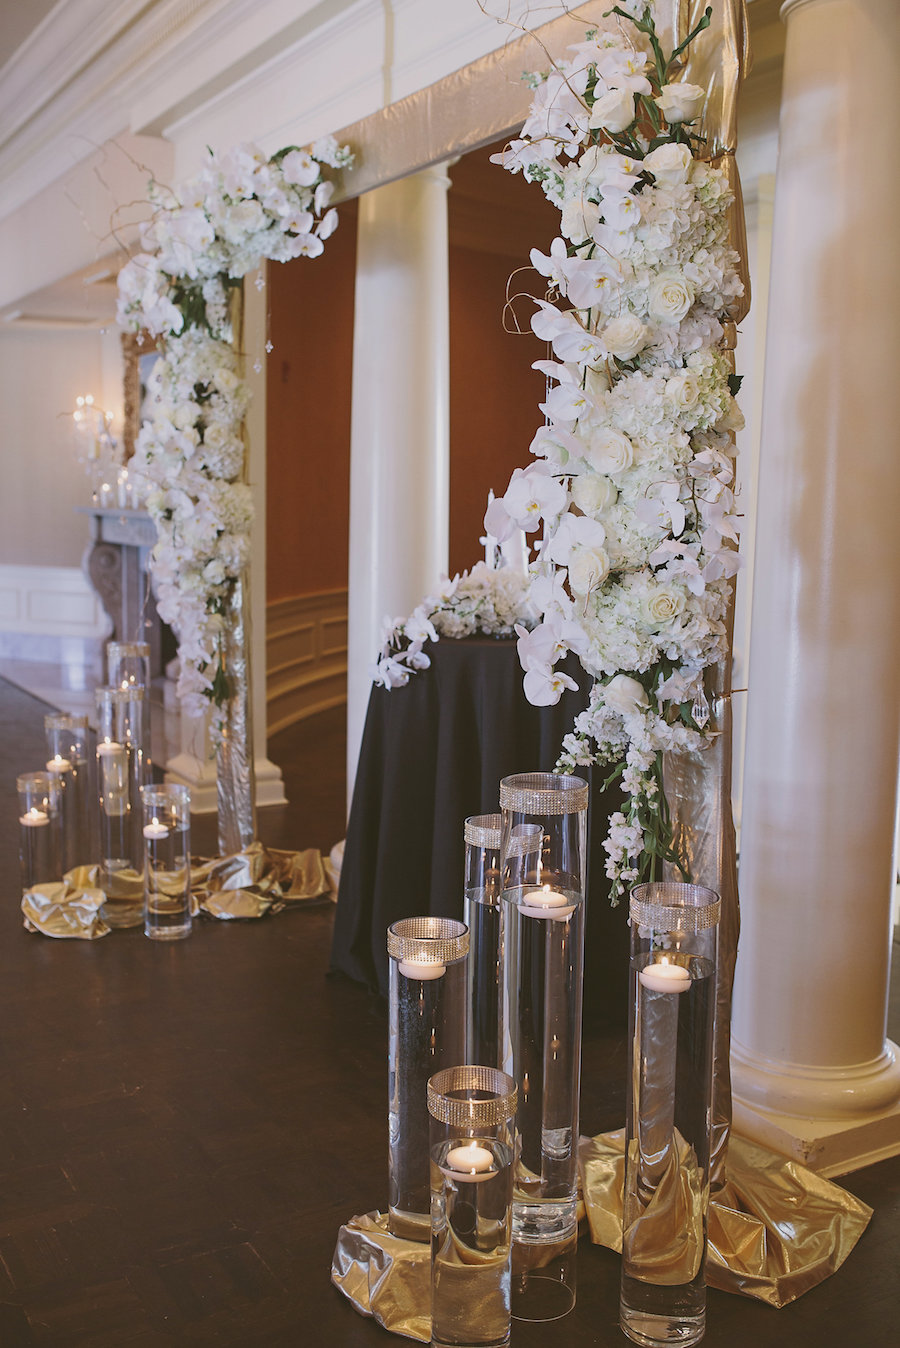 White Orchid, Roses, Floating Candle Vases at Wedding Ceremony Altar | Sarasota Wedding Planner NK Productions